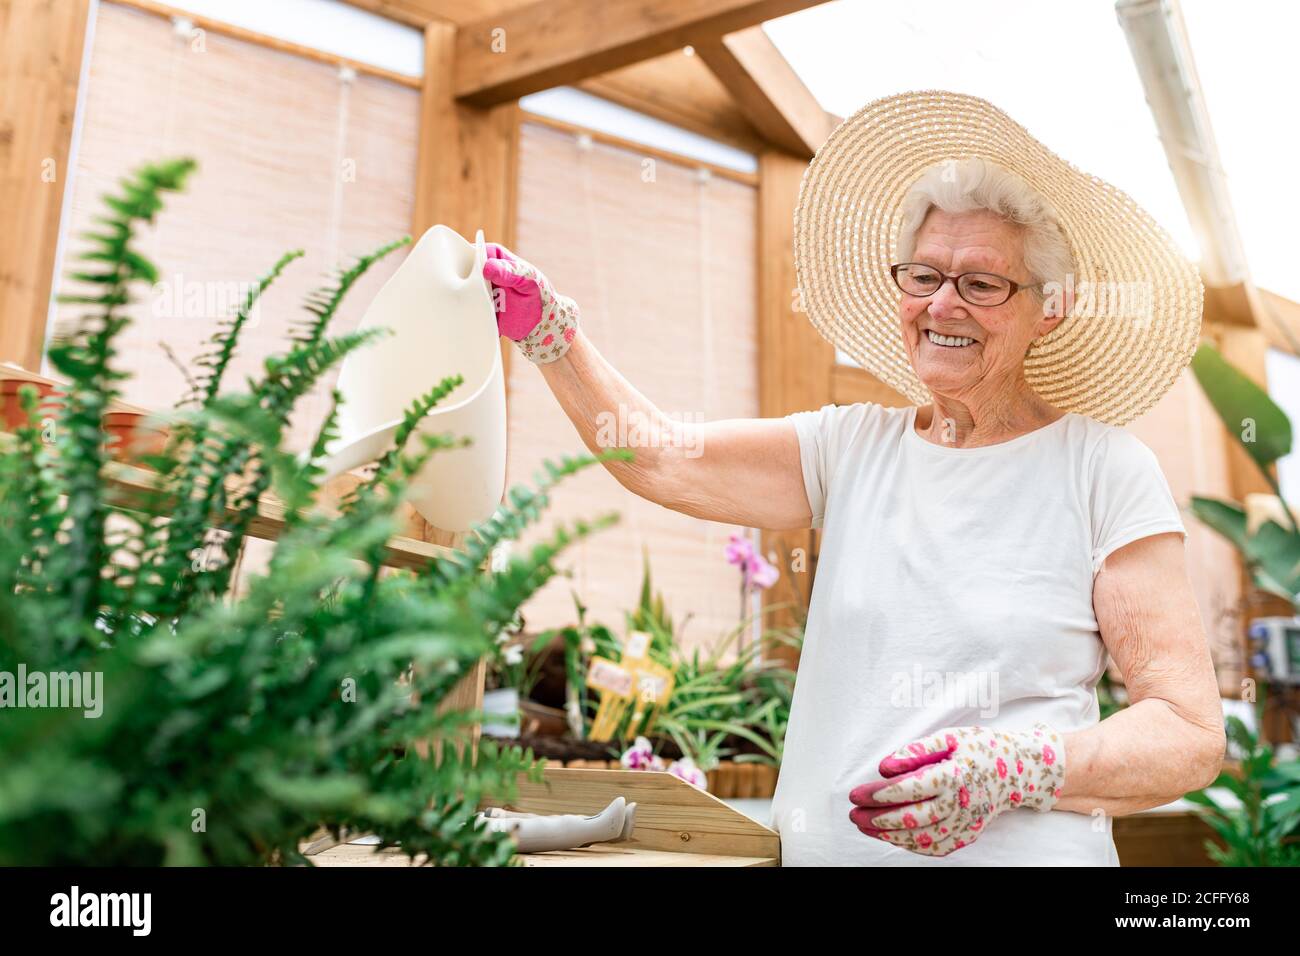 Cheerful elderly gardener smiling and watering green plants on wooden terrace Stock Photo